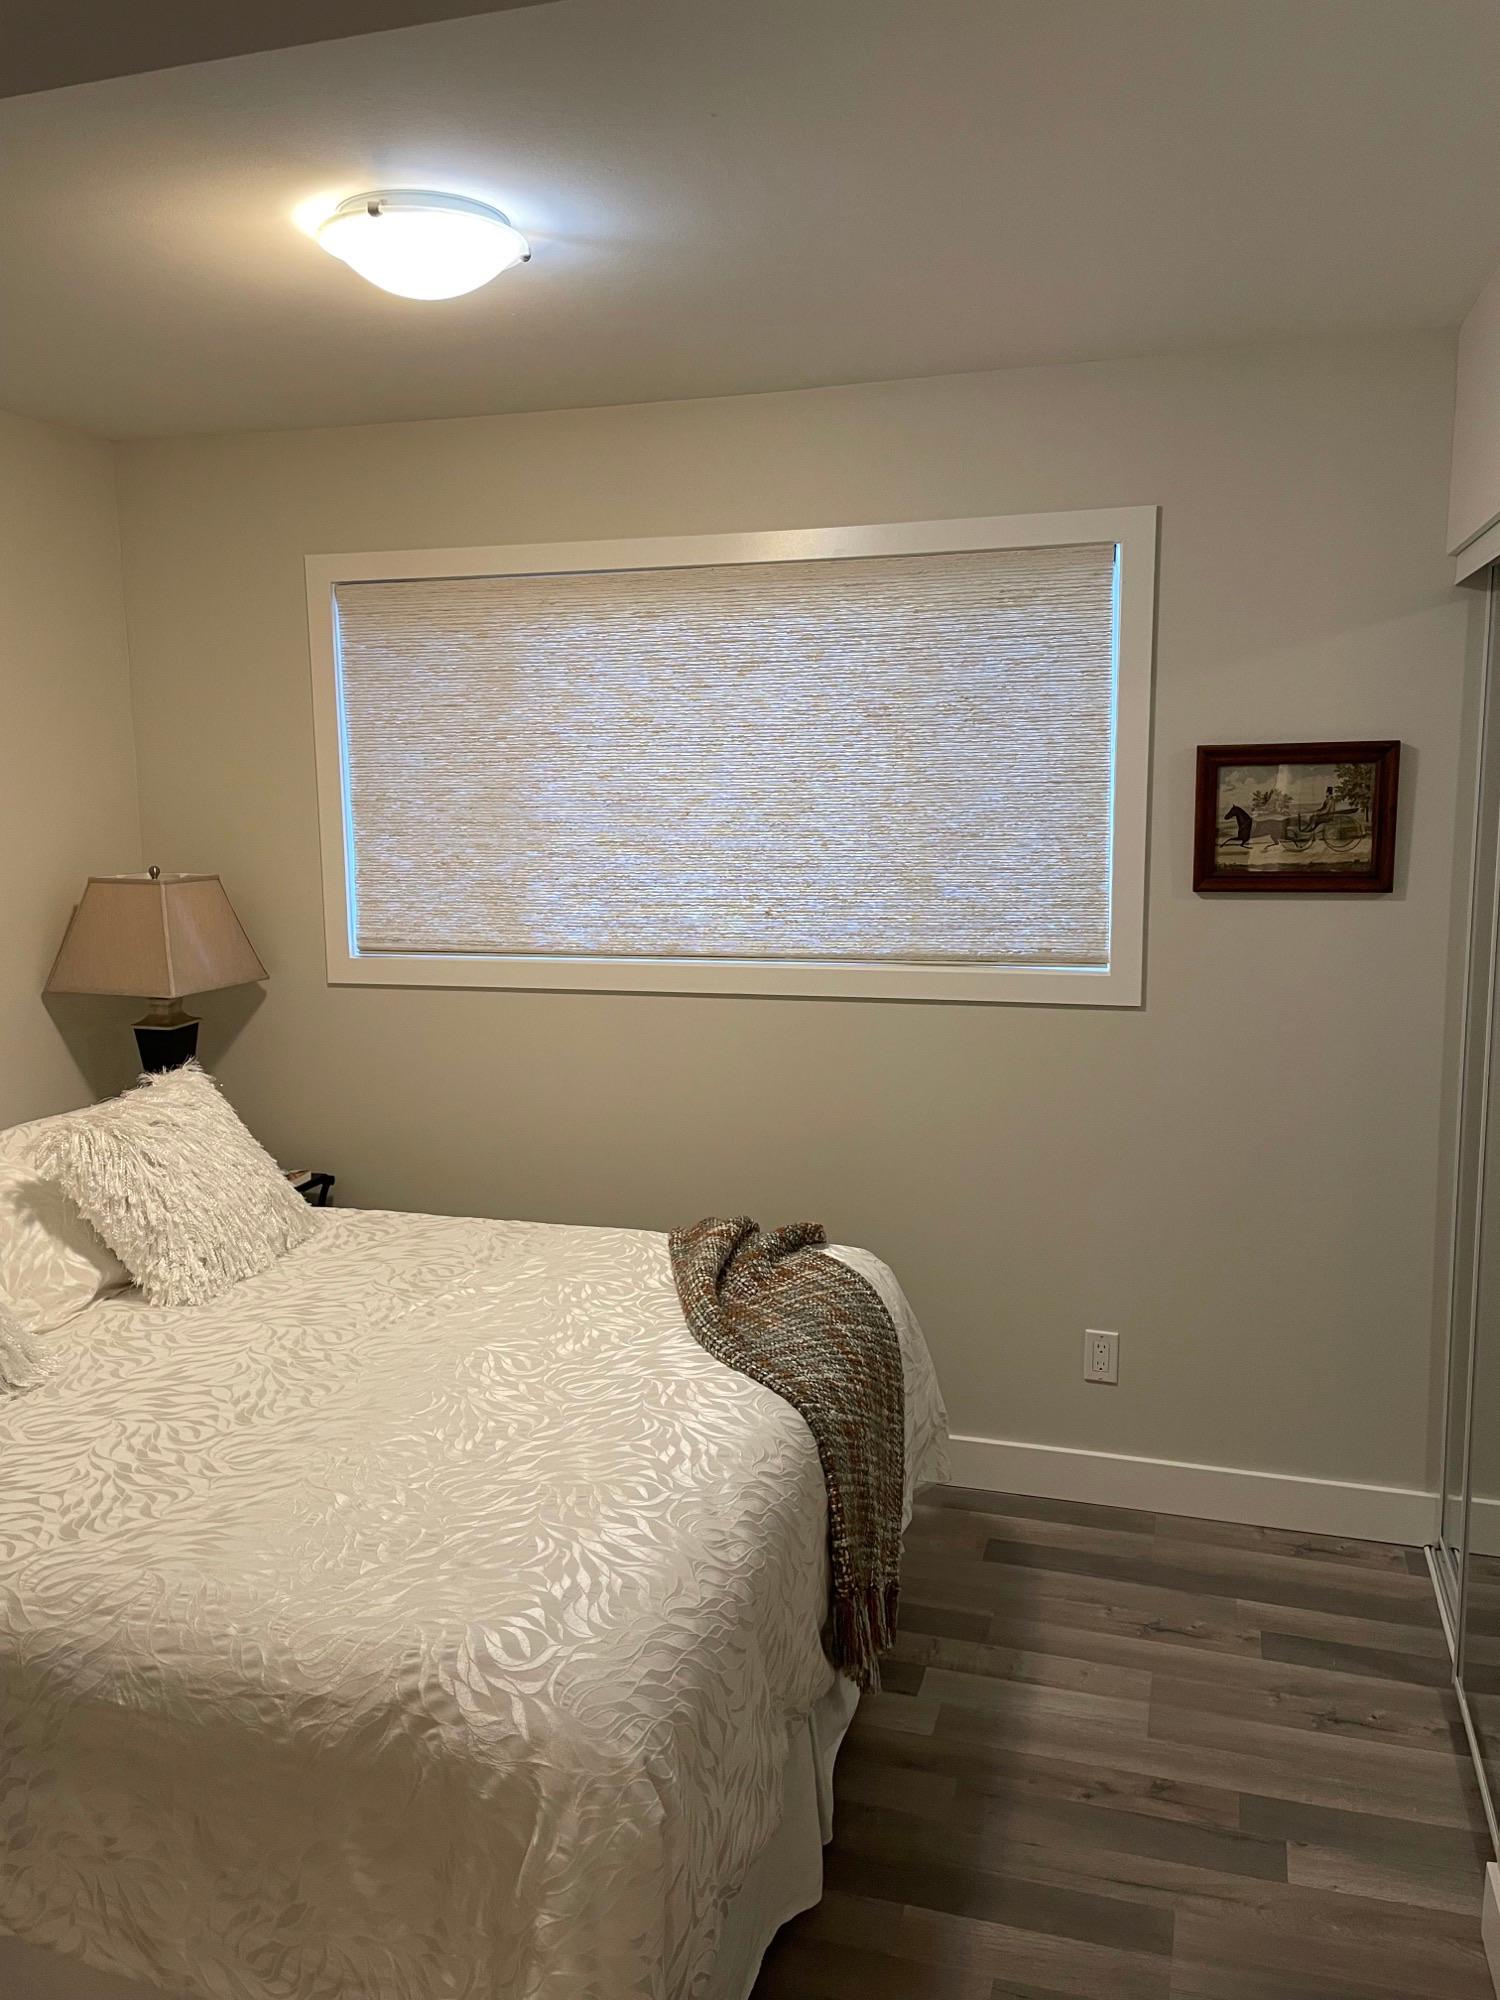 Woven Wood Shade Budget Blinds of Comox Valley and Campbell River Courtenay (250)338-8564